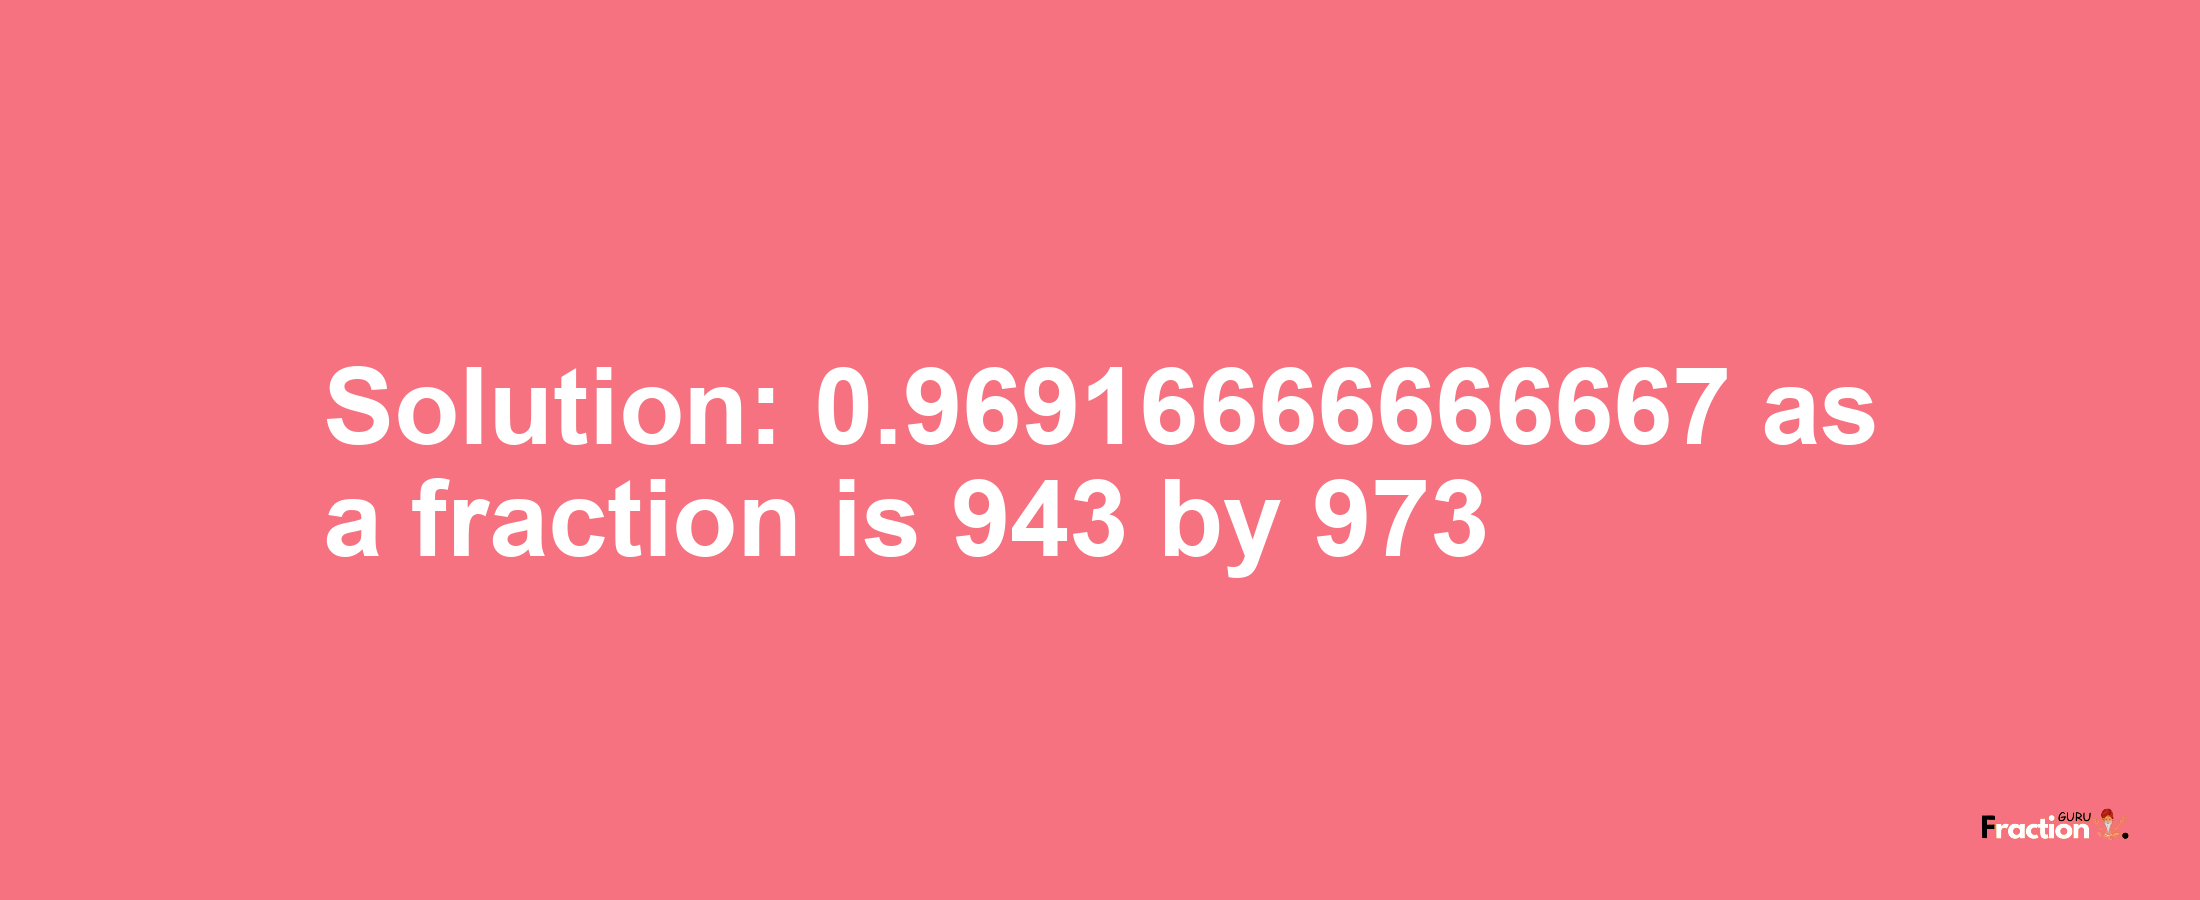 Solution:0.96916666666667 as a fraction is 943/973